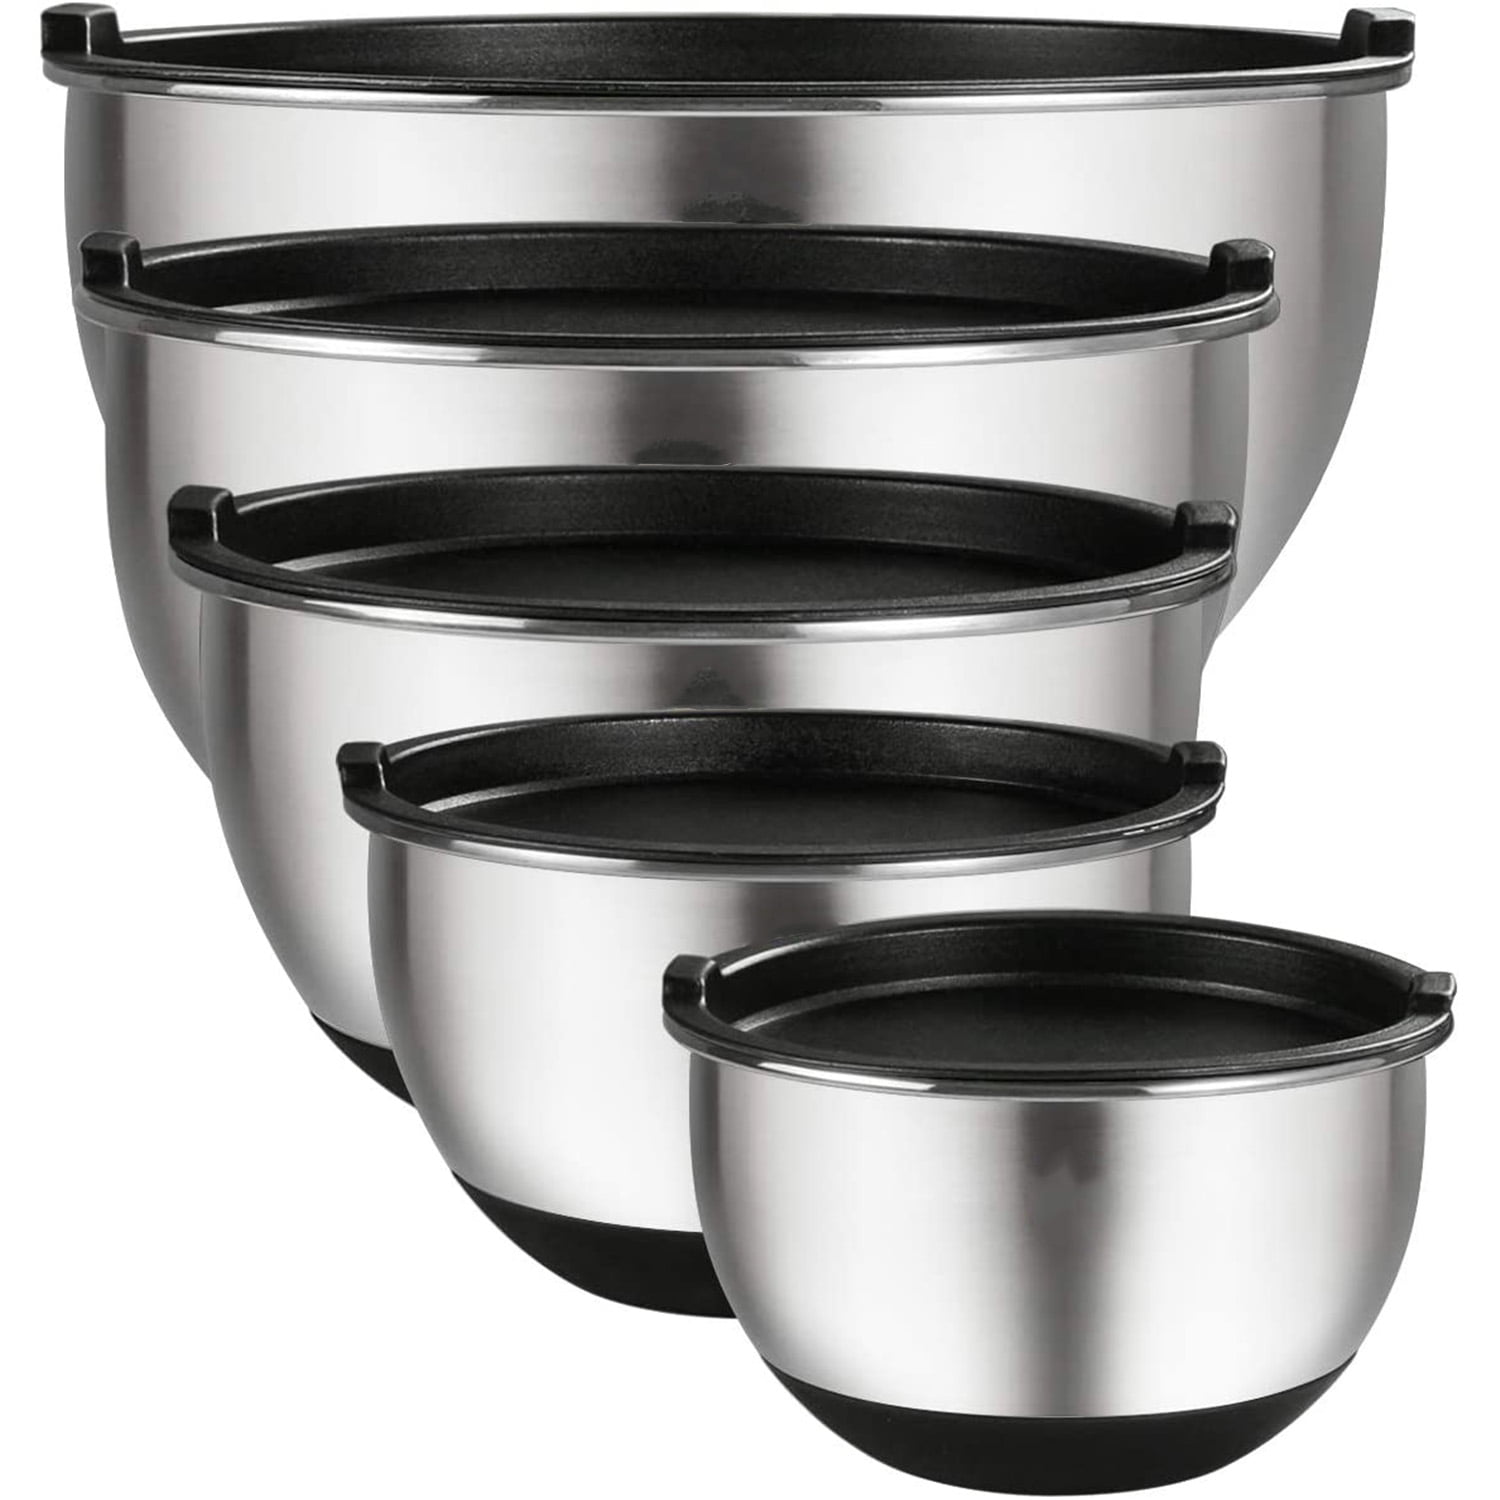 YBM Home Stainless Steel Mixing Bowl - Premium Polished Mirror Nesting Metal Bowl for Cooking and Serving, Stackable for Convenient St